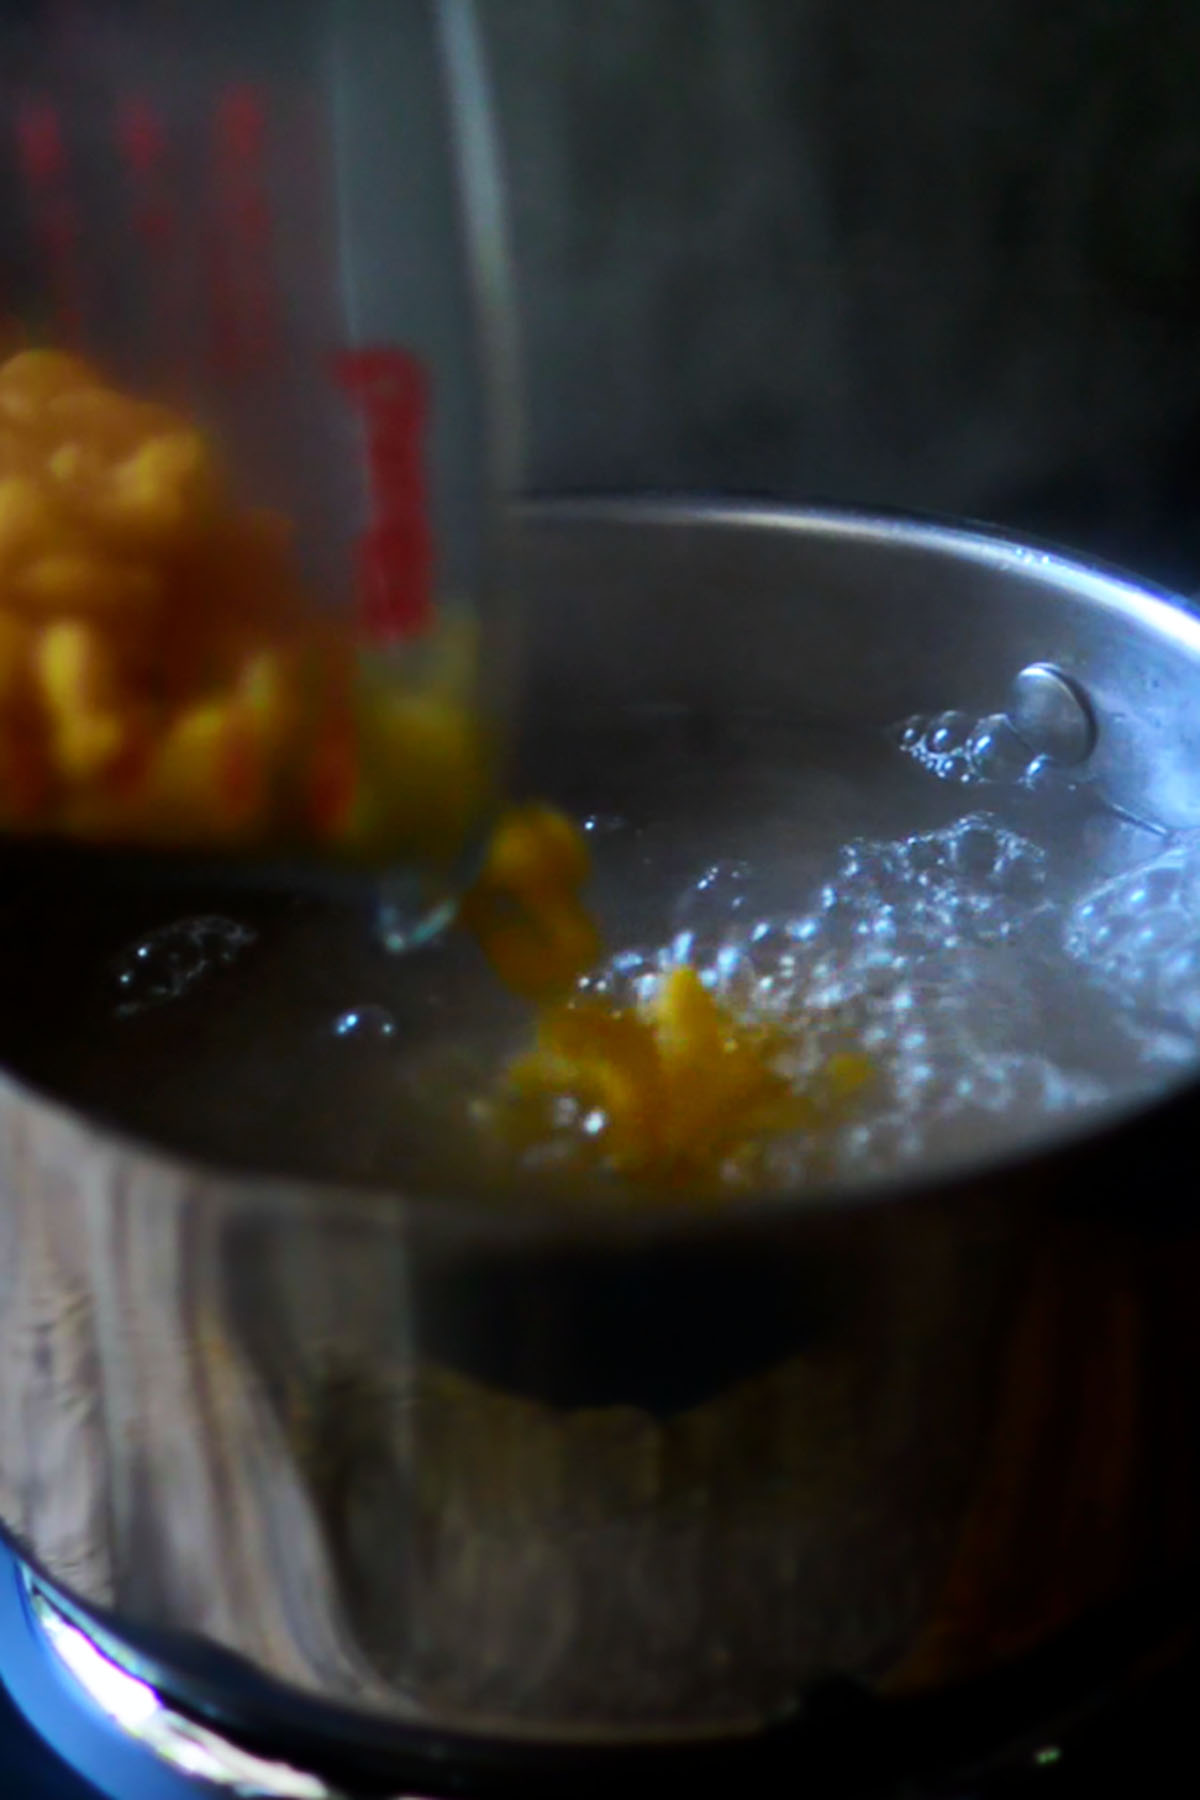 Elbow macaroni being poured into a stock pot of boiling water.